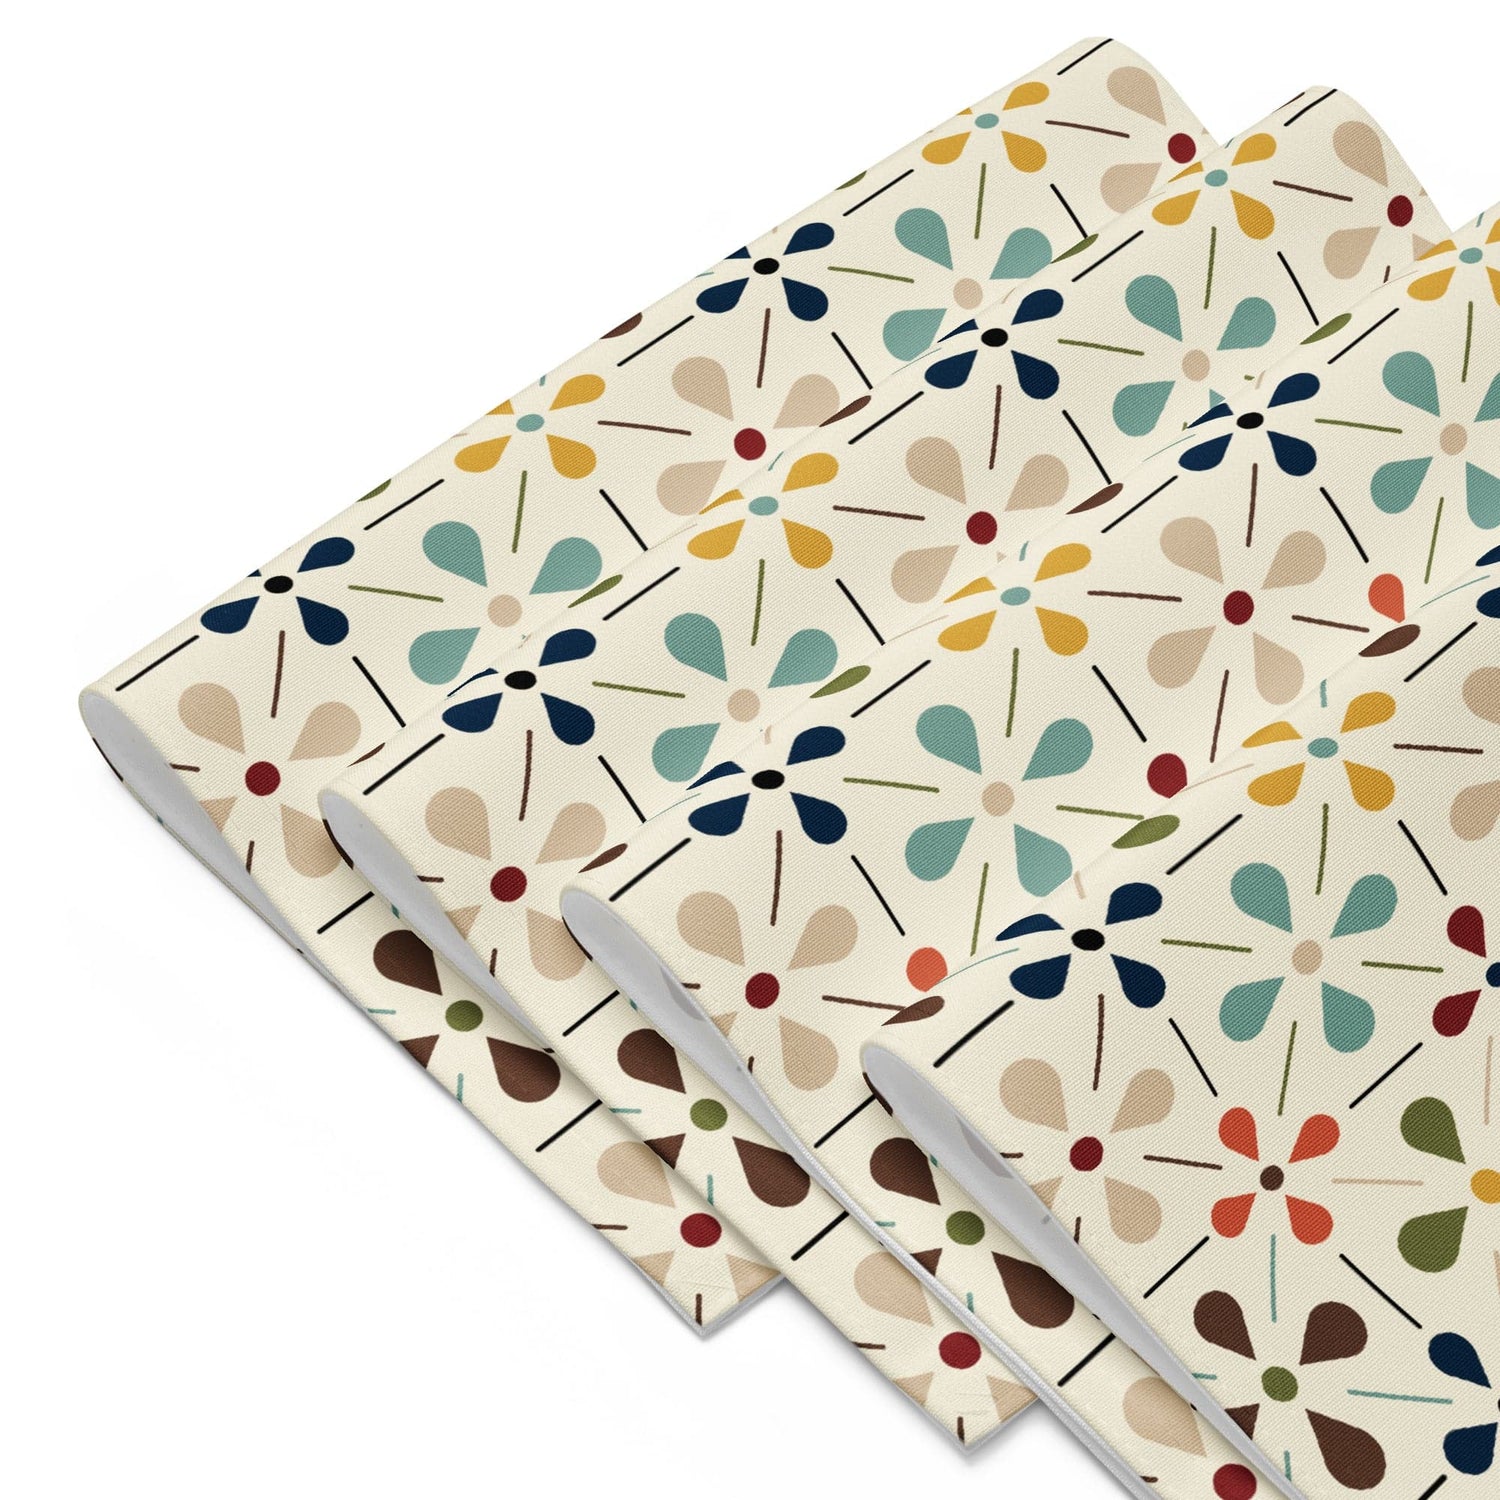 Kate McEnroe New York Set of 4 Mid Century Modern Retro Floral Placemats, 50s MCM Cream, Teal, Mustard, and Rust Table MatsPlacemats7869988_17484